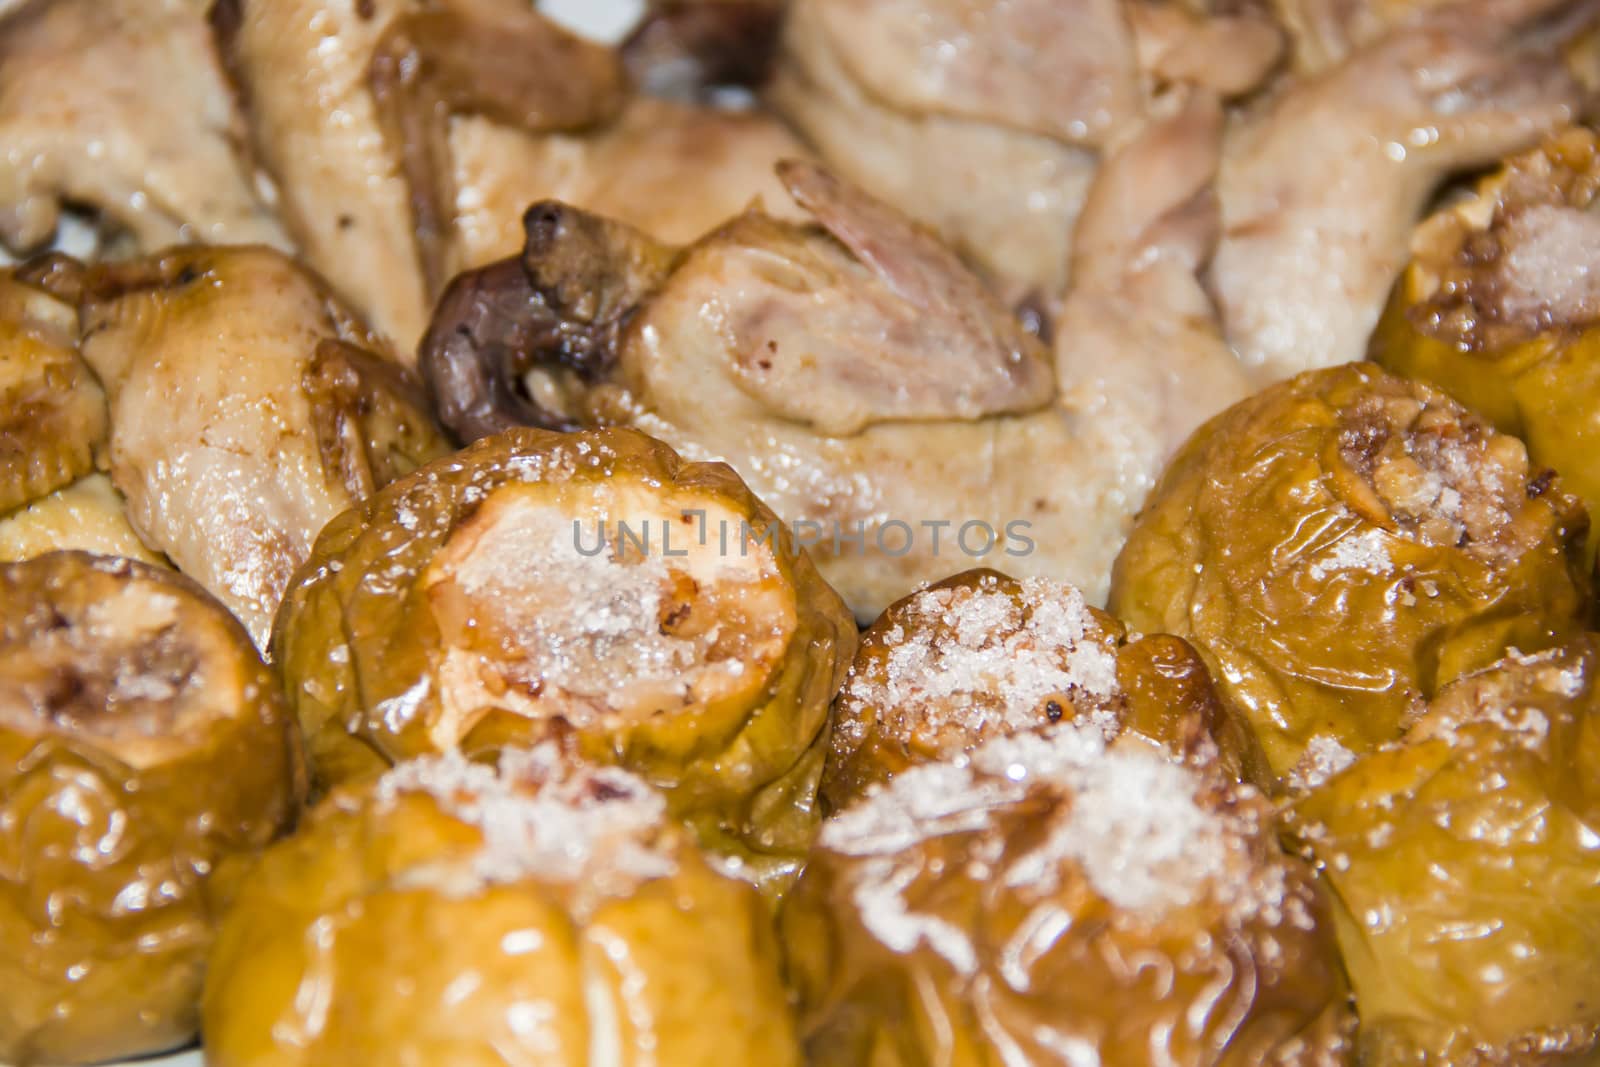 quail on apples with honey and nuts